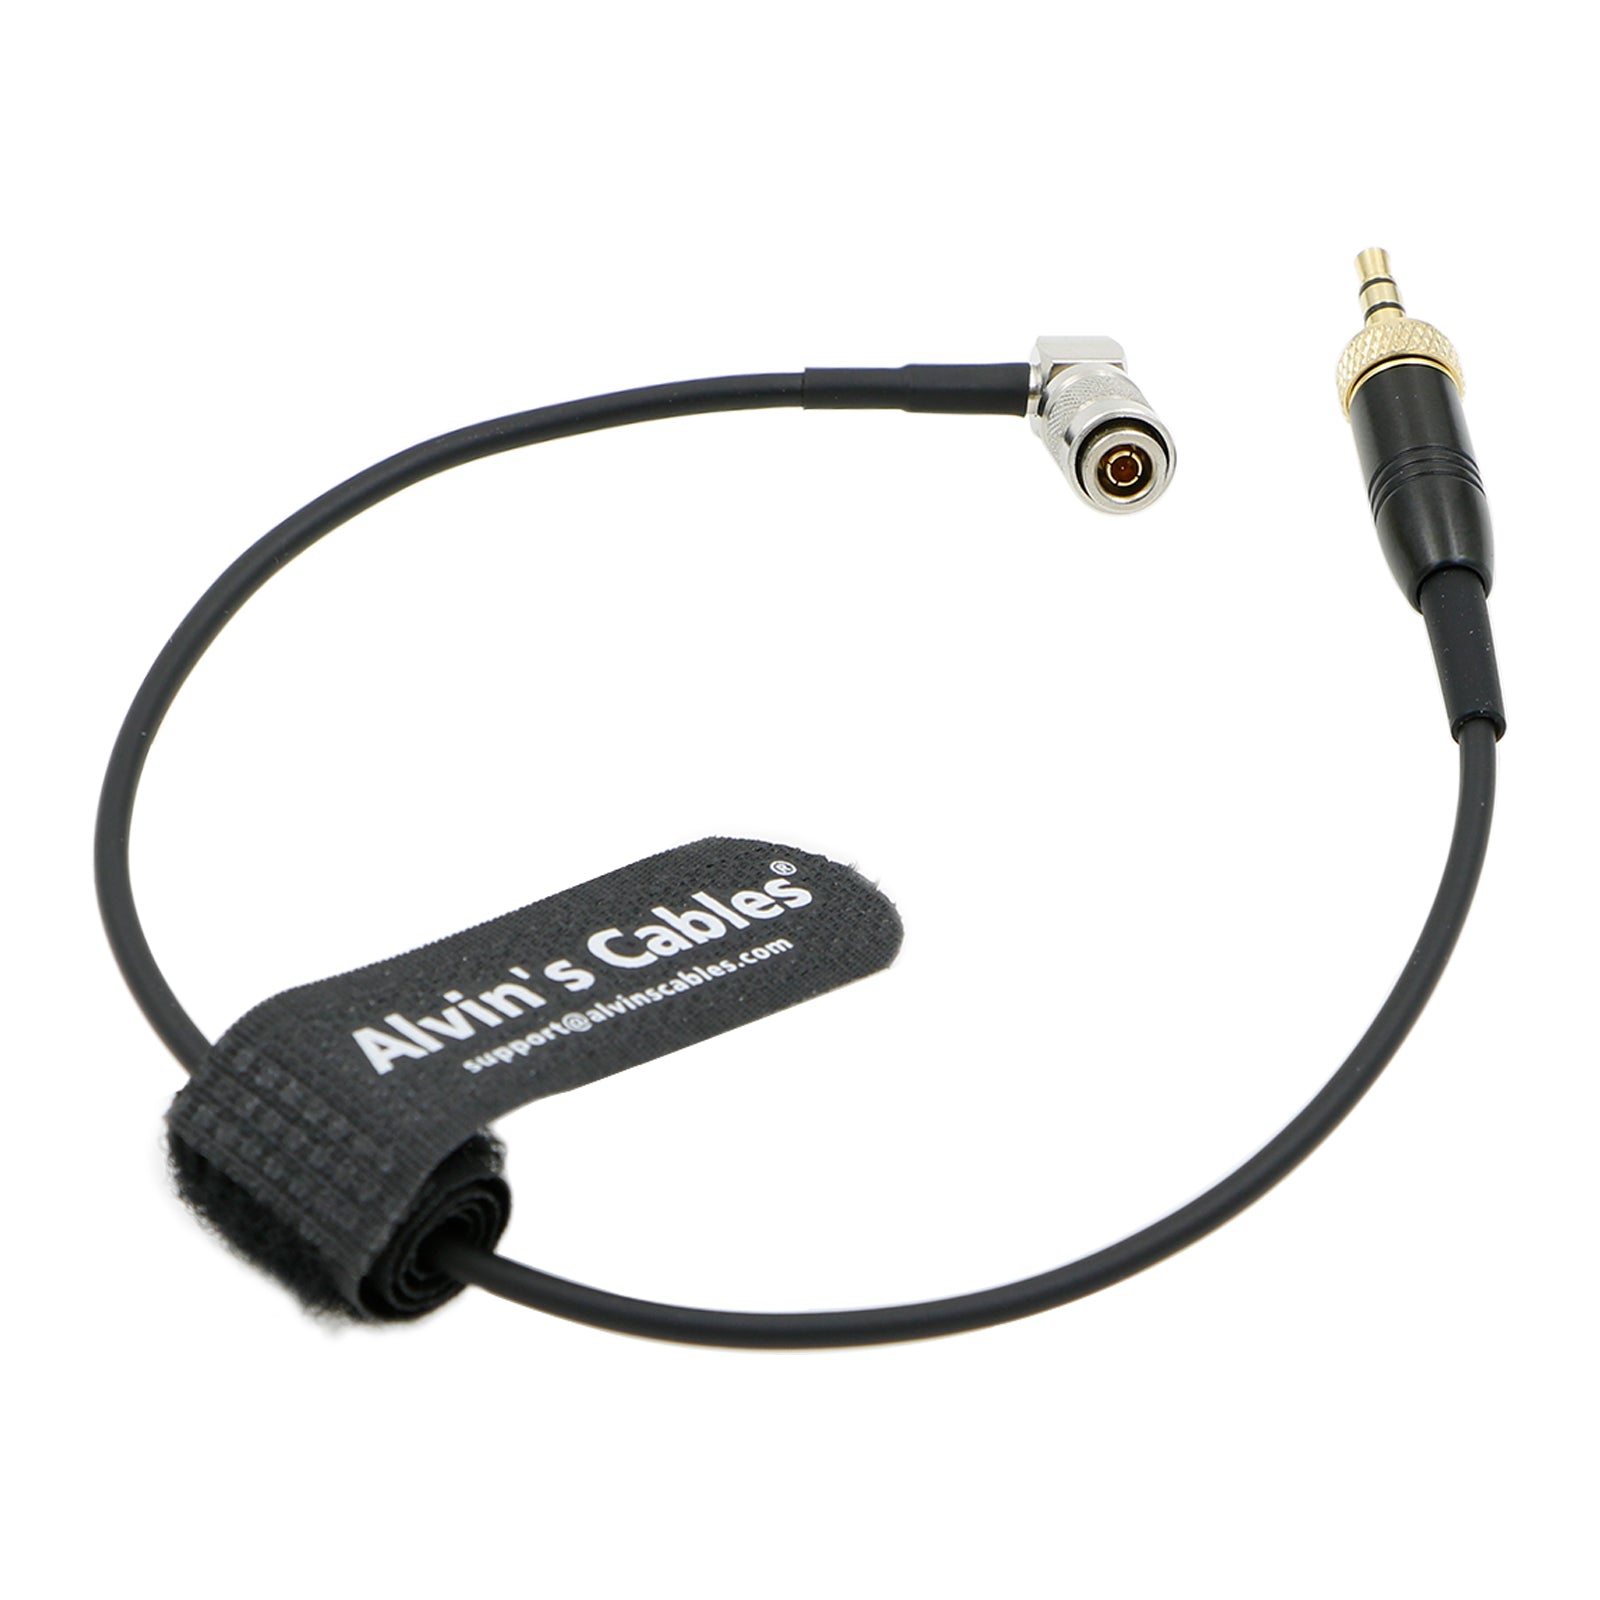 Alvin's Cables Timecode Cable for Canon R5C from Deity Tentacle Sync 3.5mm Lock TRS to DIN 1.0/2.3 Time Code Cable